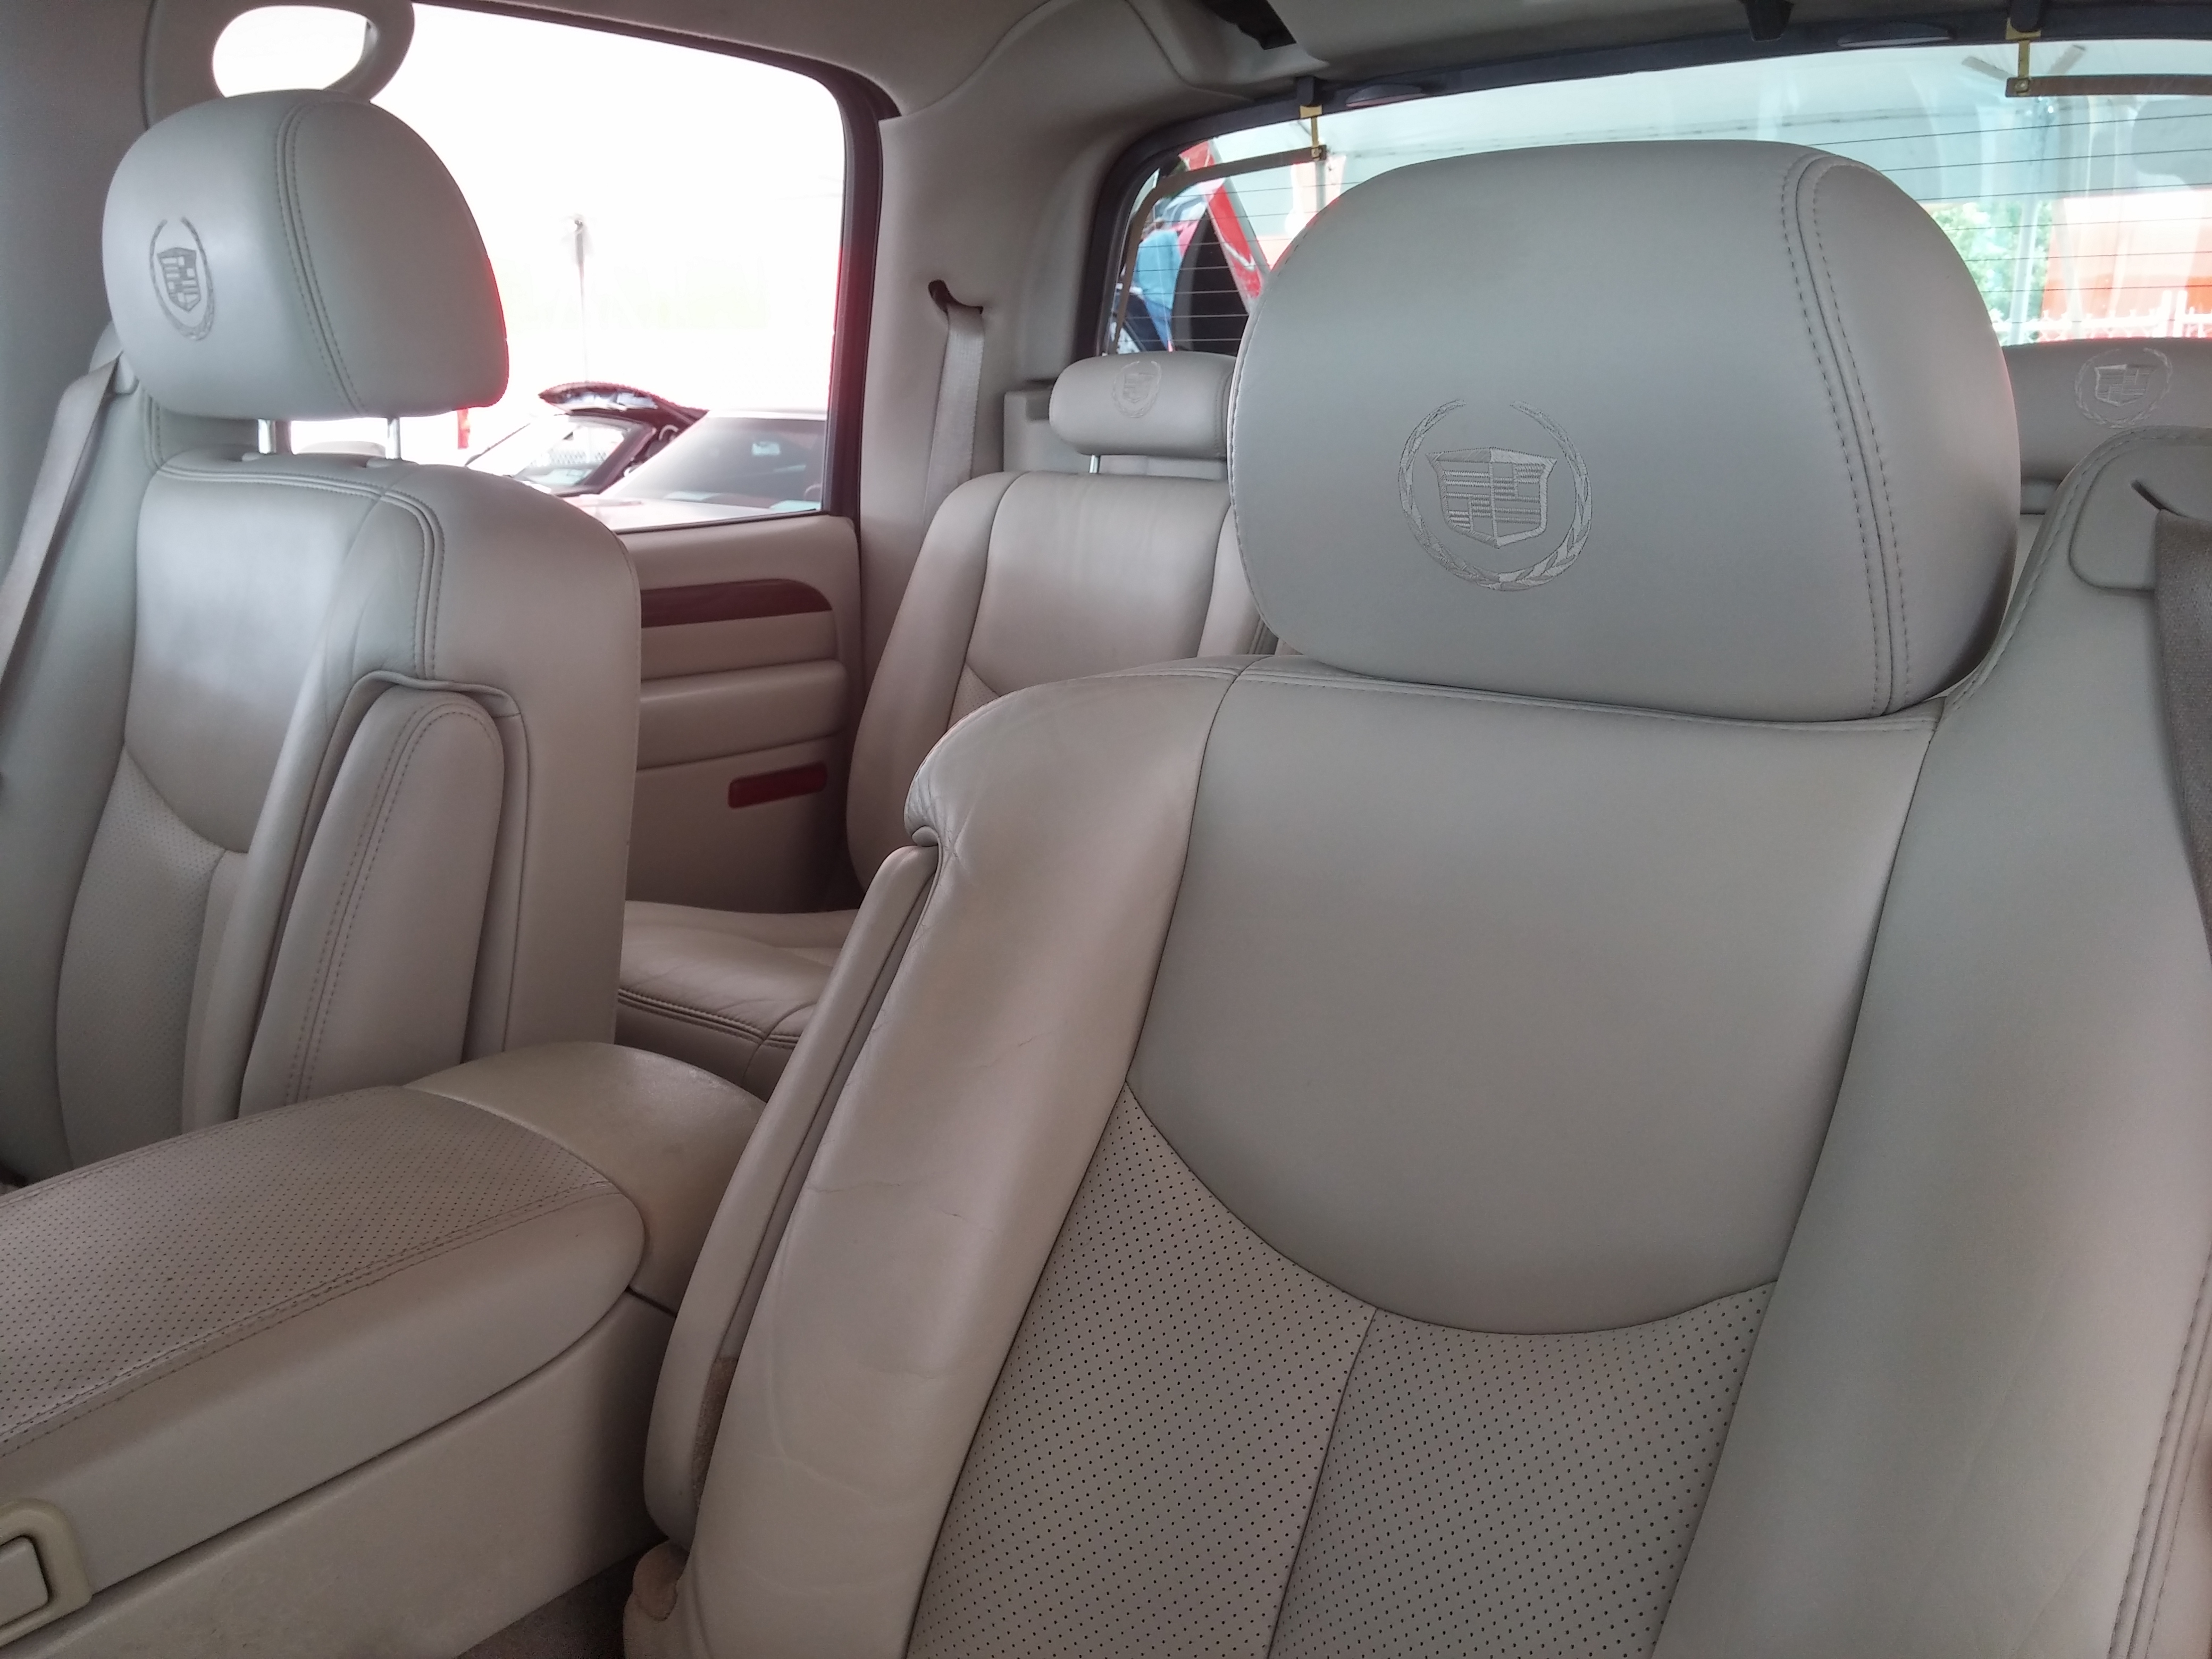 3rd Image of a 2004 CADILLAC ESCALADE EXT 1500; LUXURY